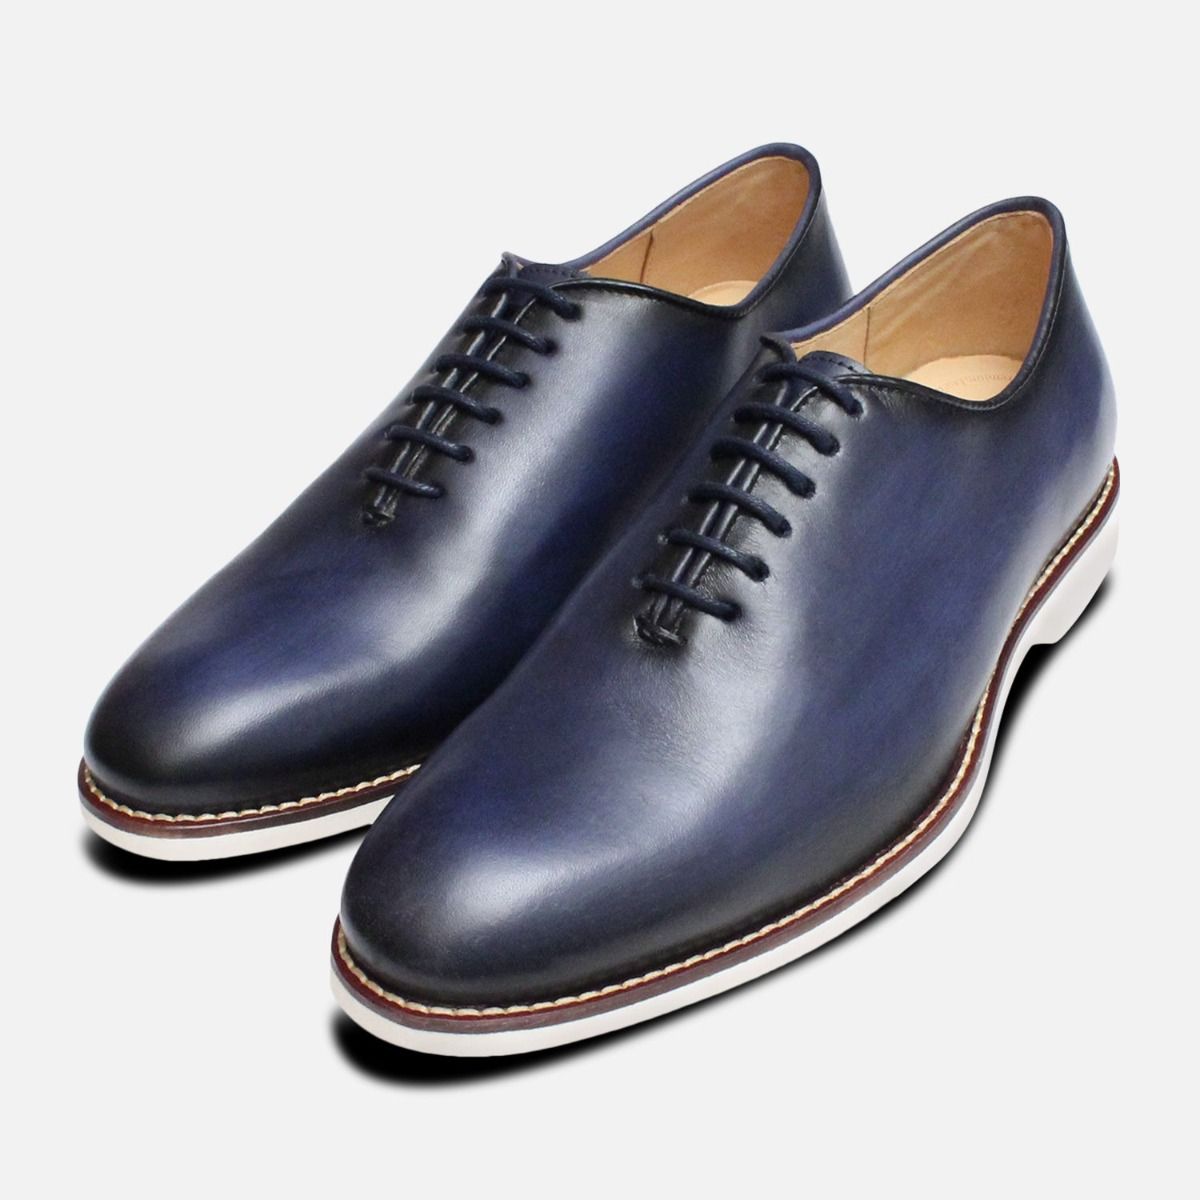 navy and white oxford shoes